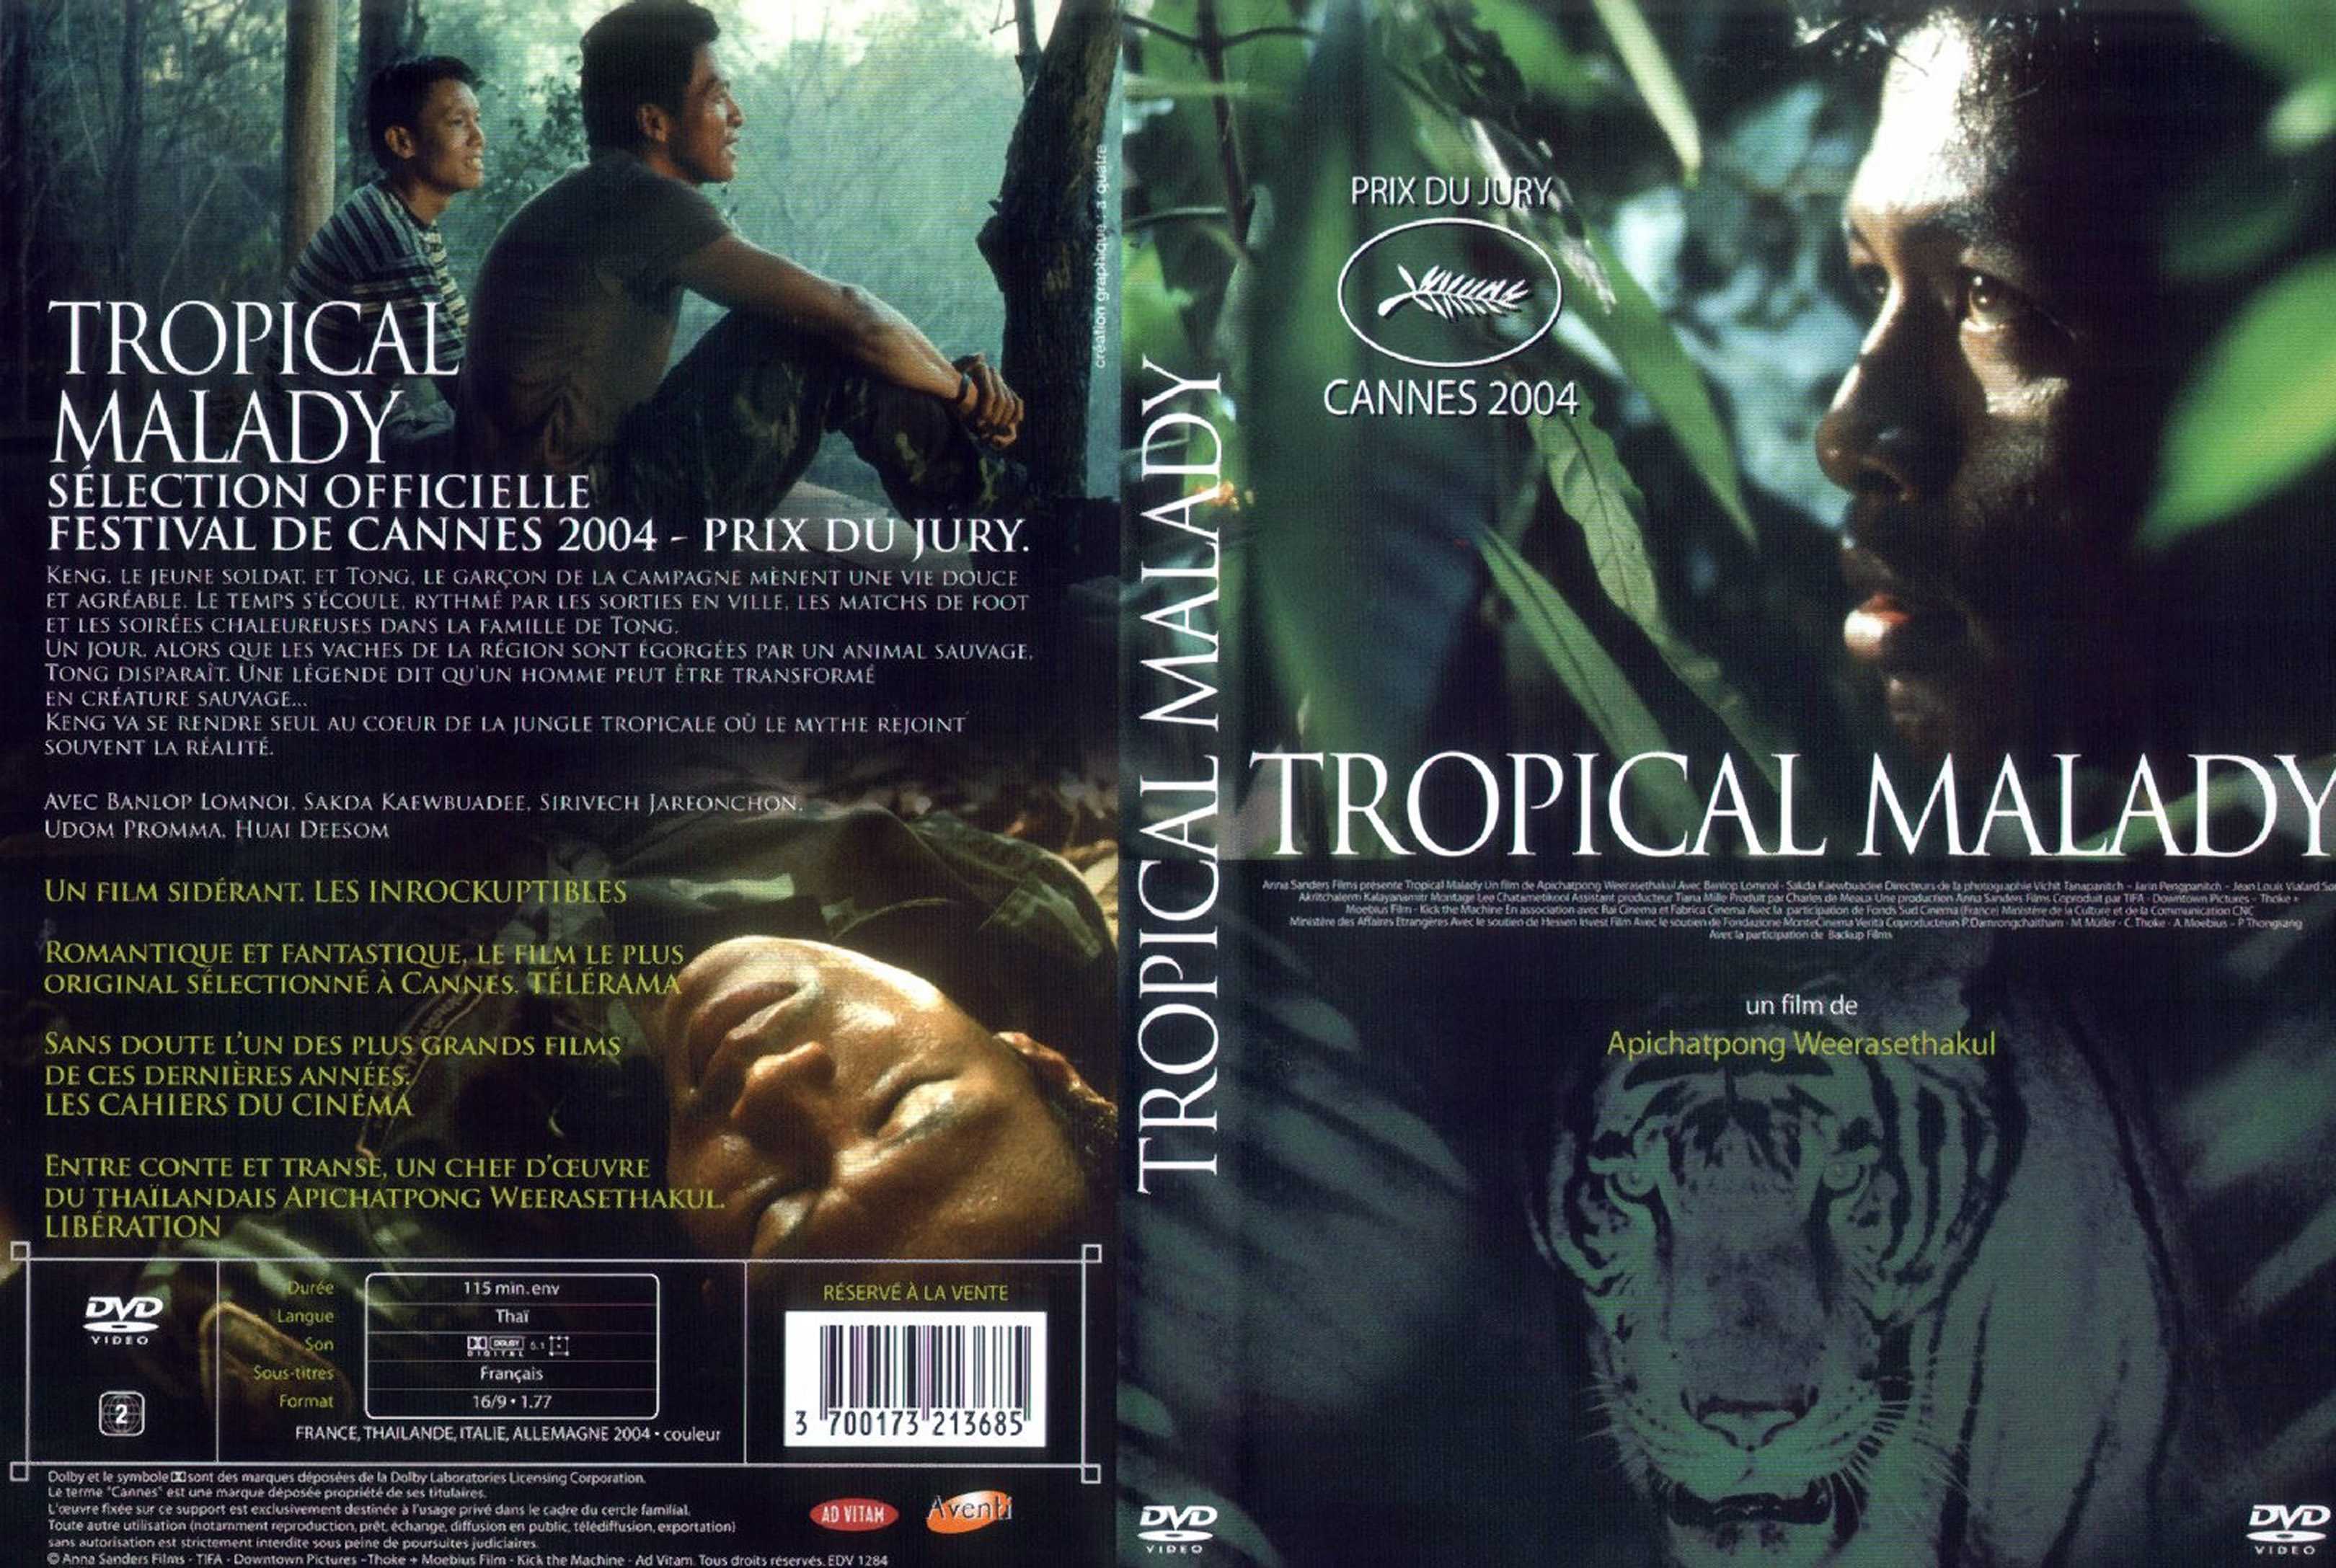 Jaquette DVD Tropical malady